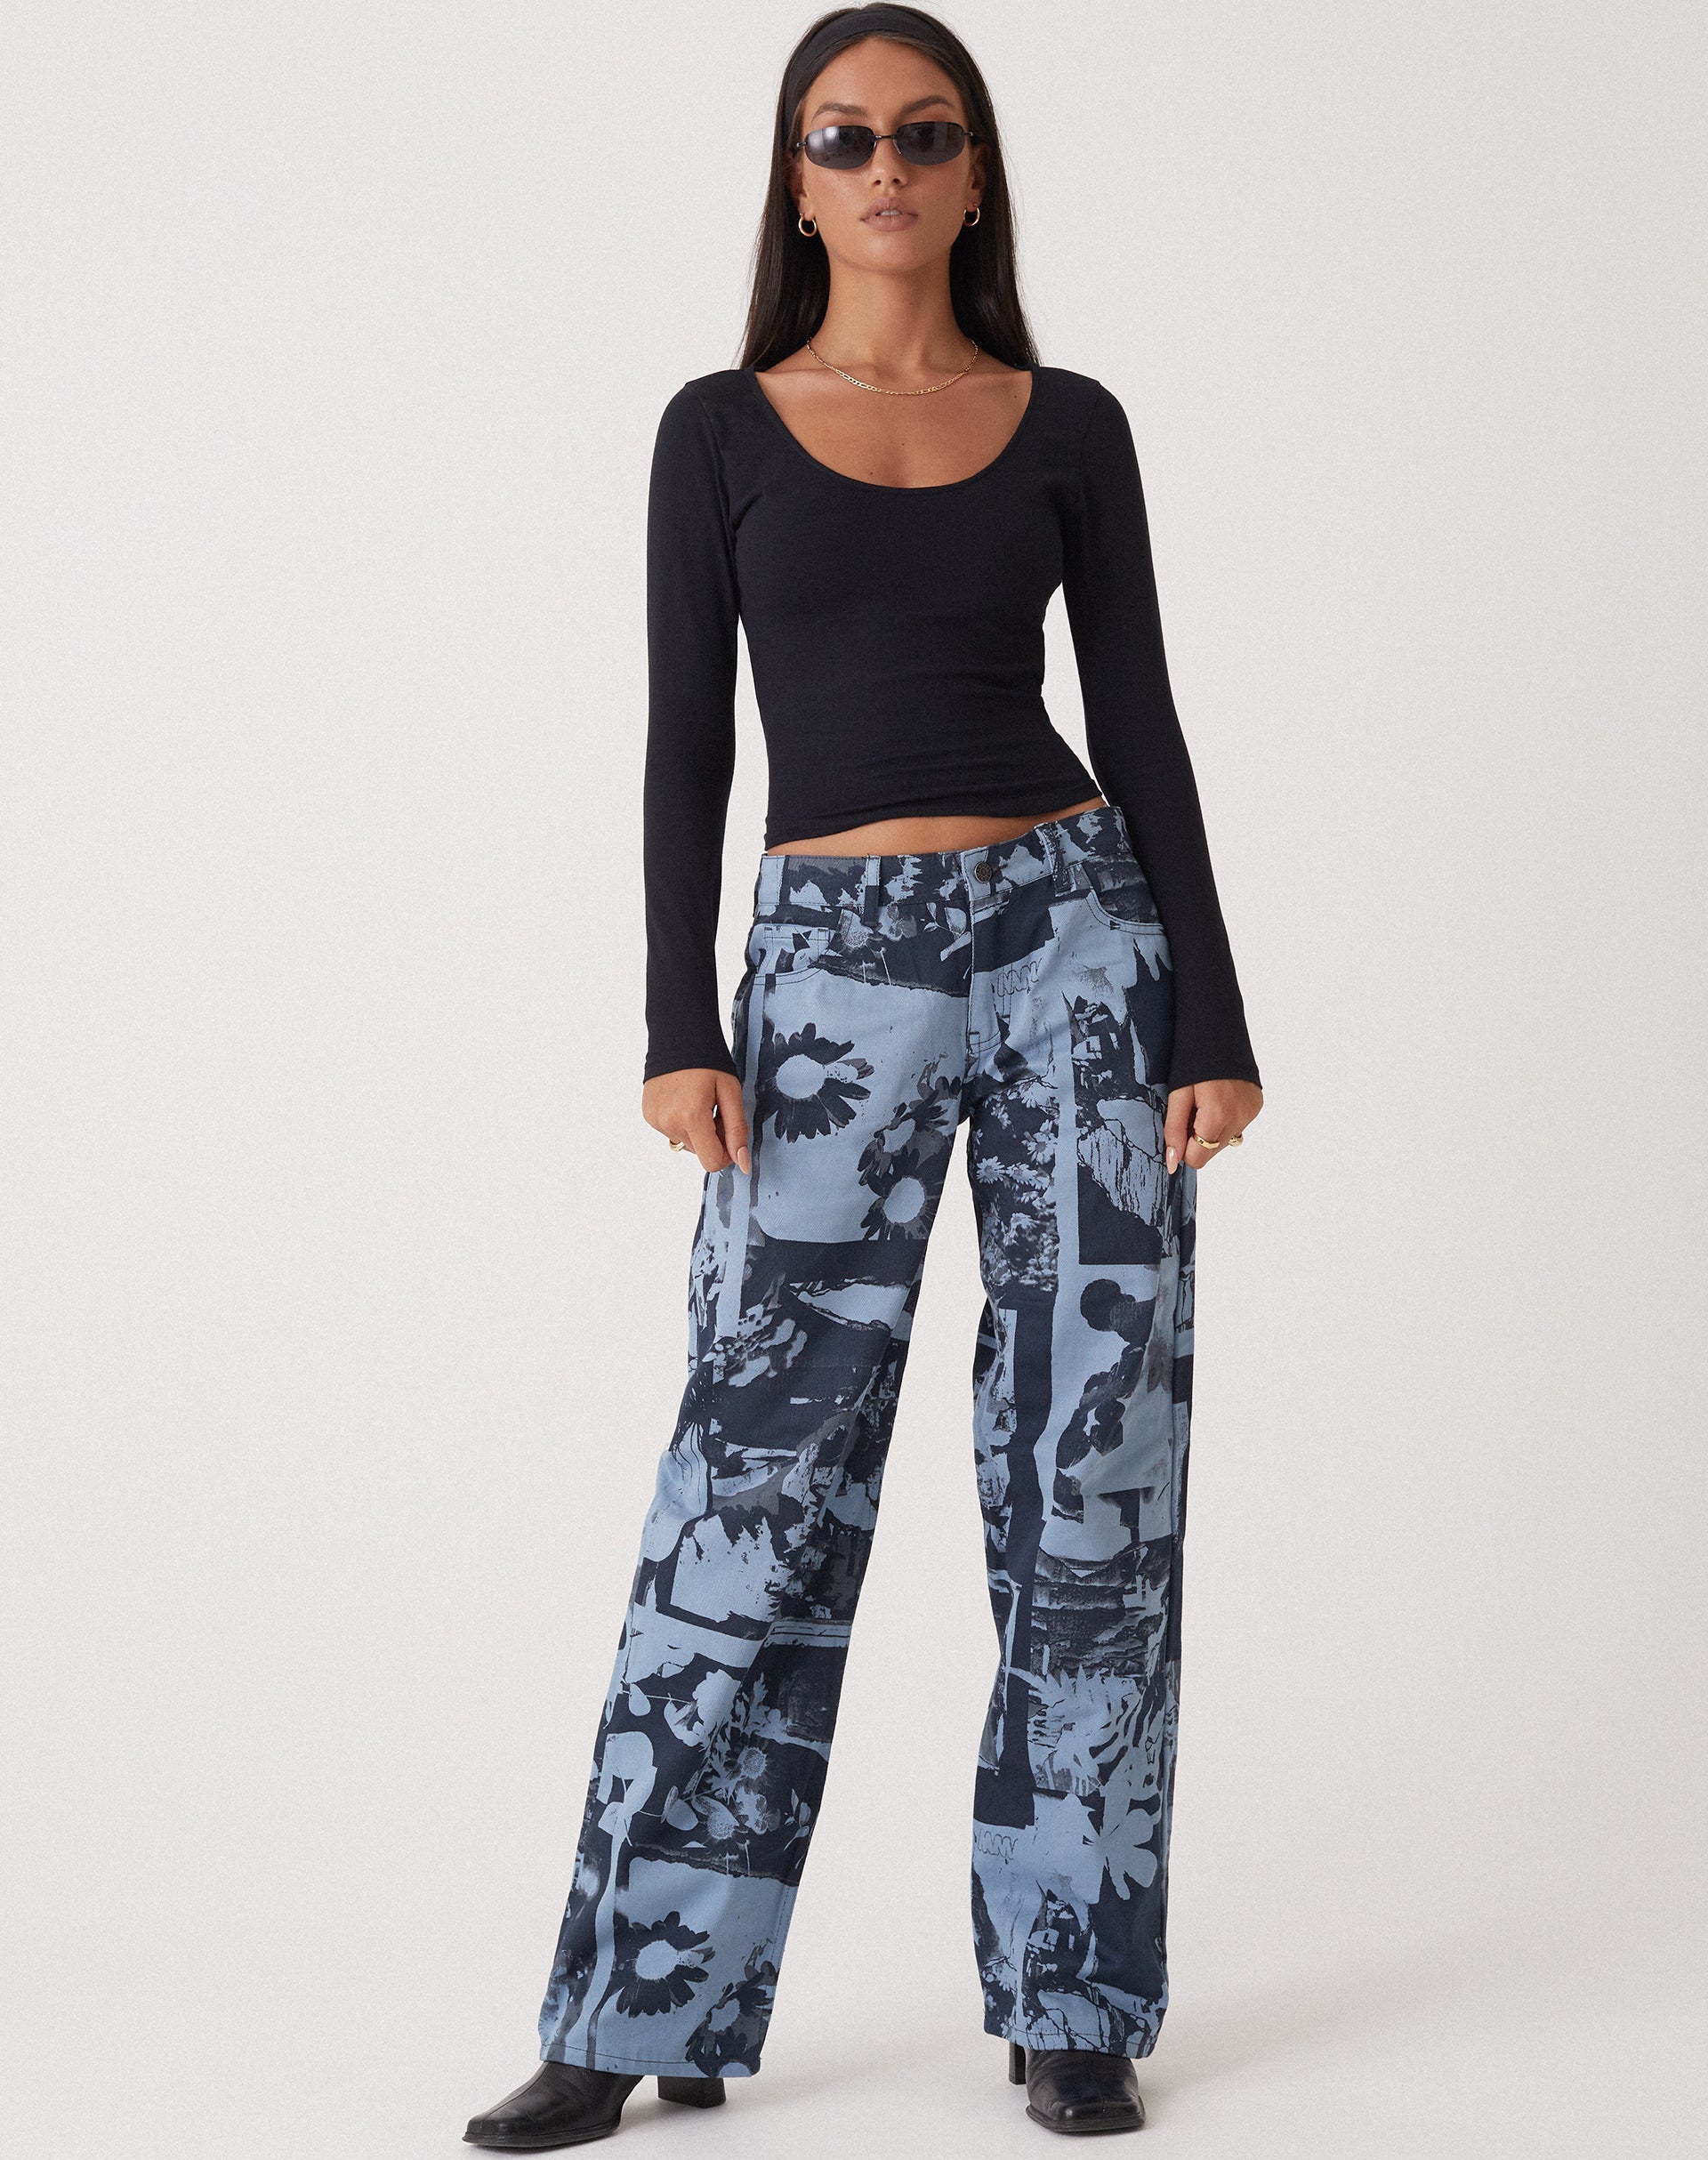 image of MOTEL X OLIVIA NEILL Low Rise Parallel Jean in Photo Collage Blue